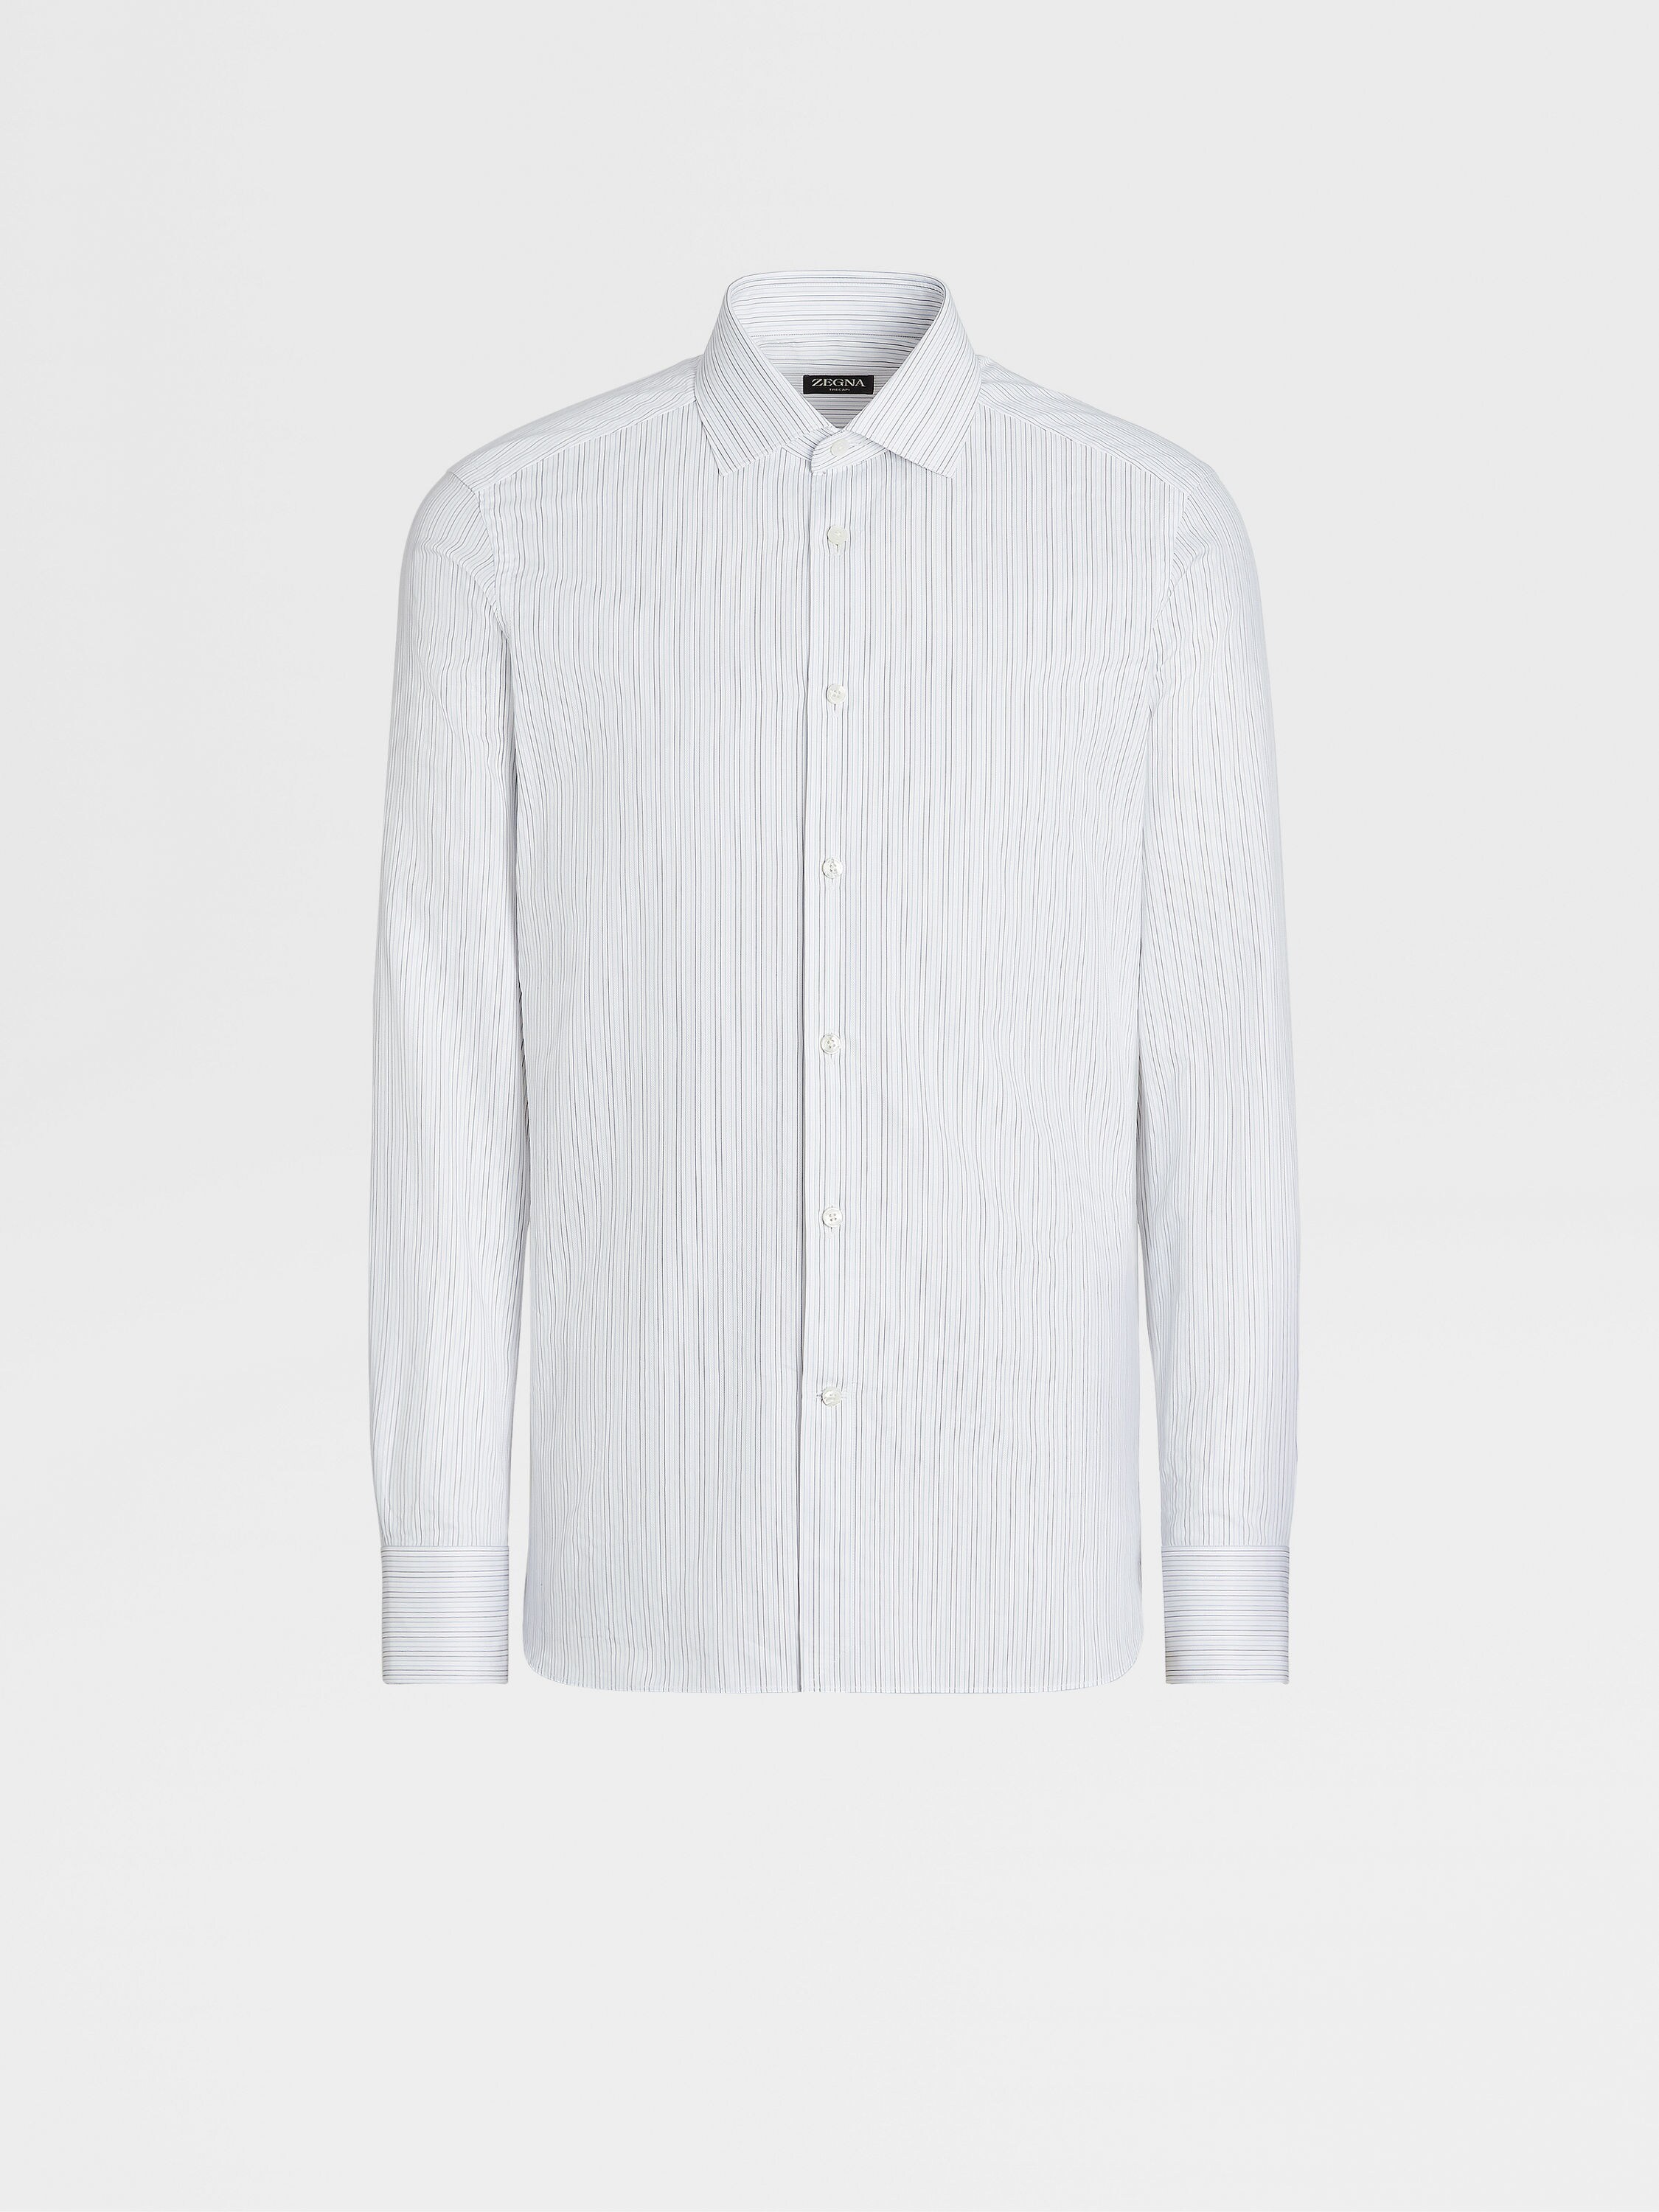 White Navy Blue and Light Blue Trecapi Cotton Structured Micro-striped Shirt